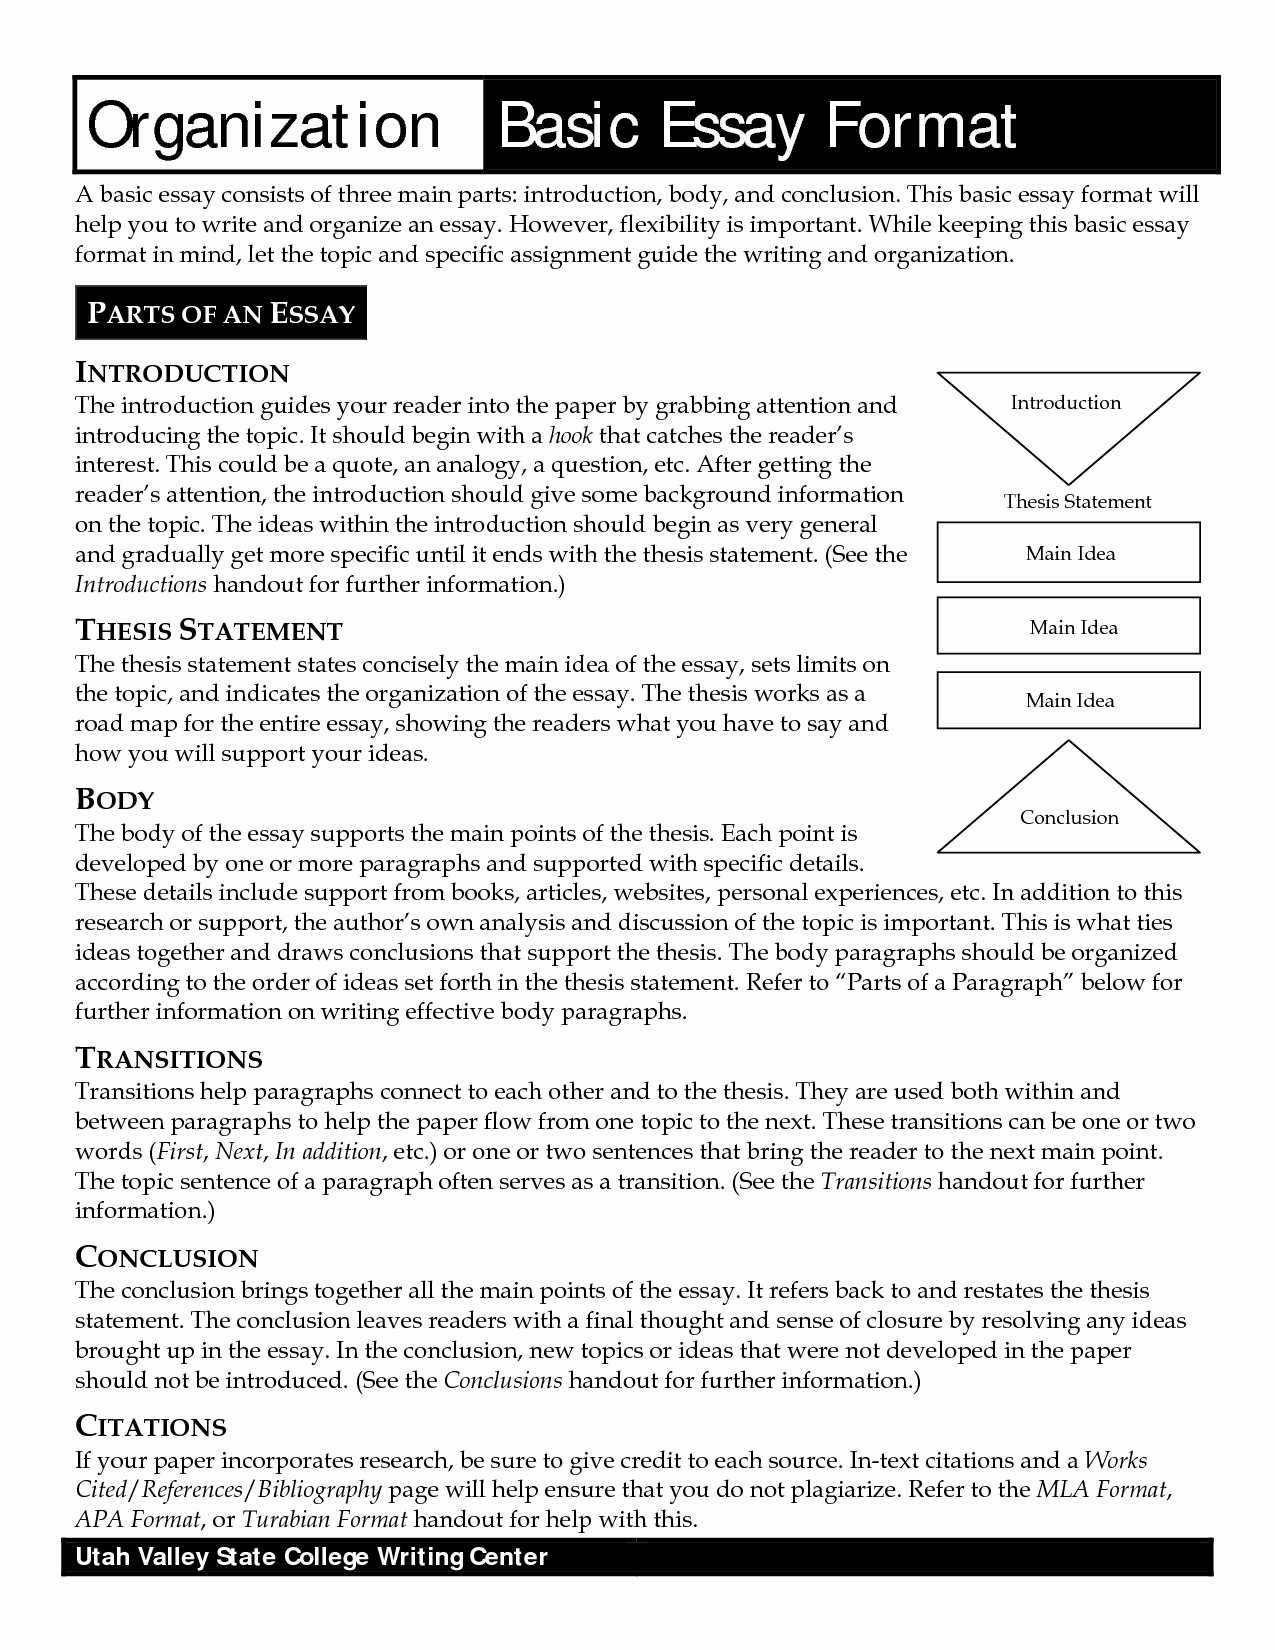 Business organizations Worksheet or How to Write An Evaluation Essay Awesome Academic Essay Phrases I